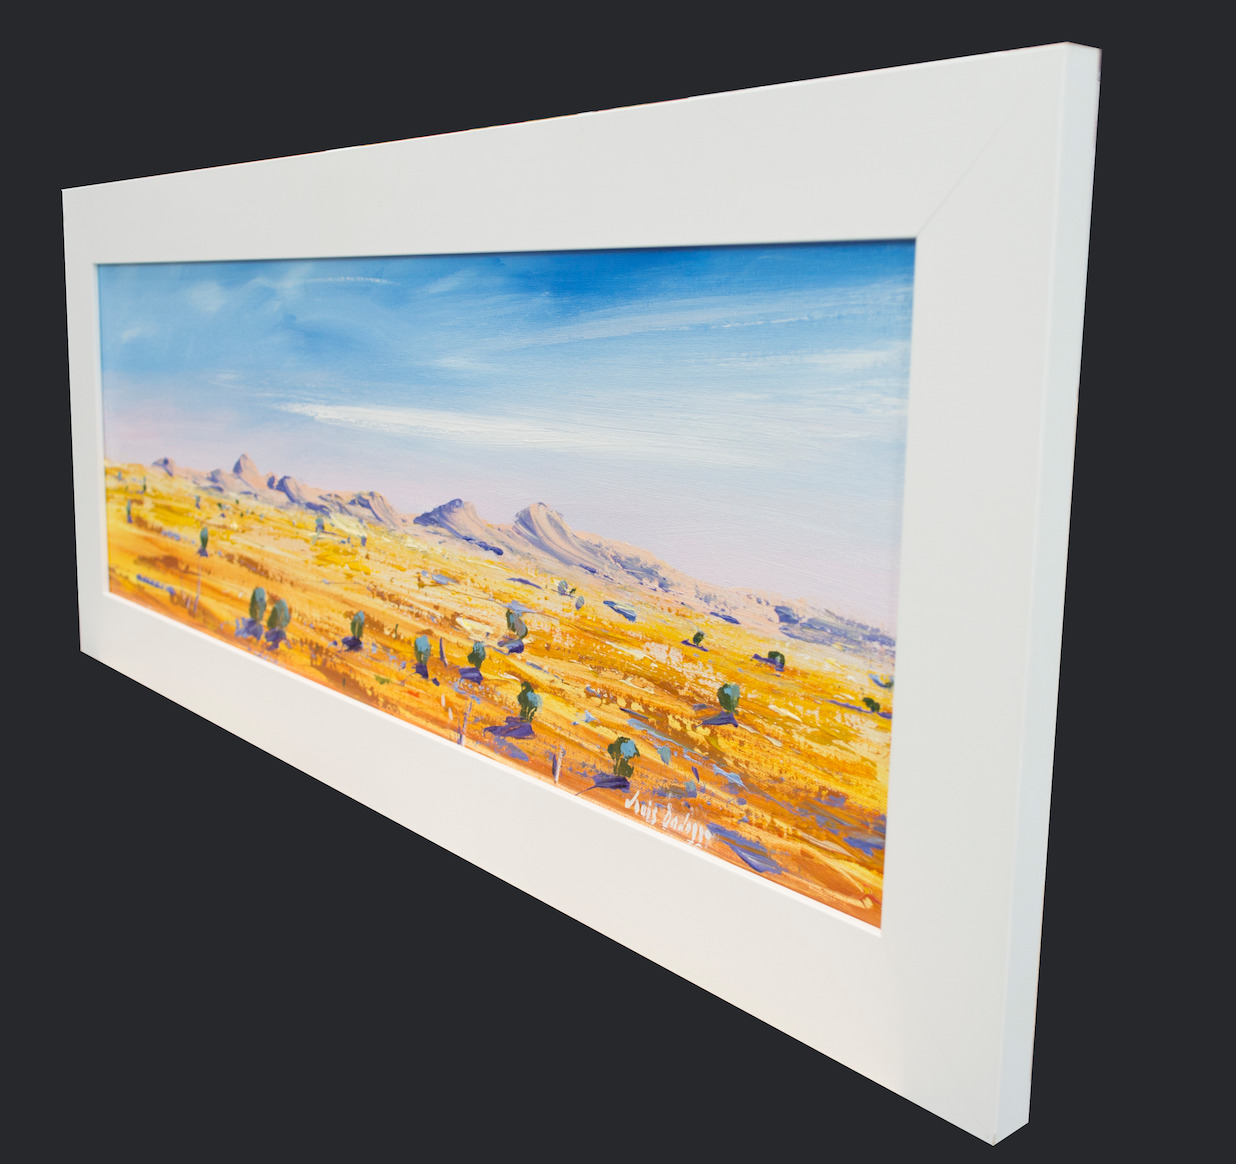 Framed Side View Of Landscape Painting "East Mac Donnell Ranges Central Australia" By Louis Dalozzo